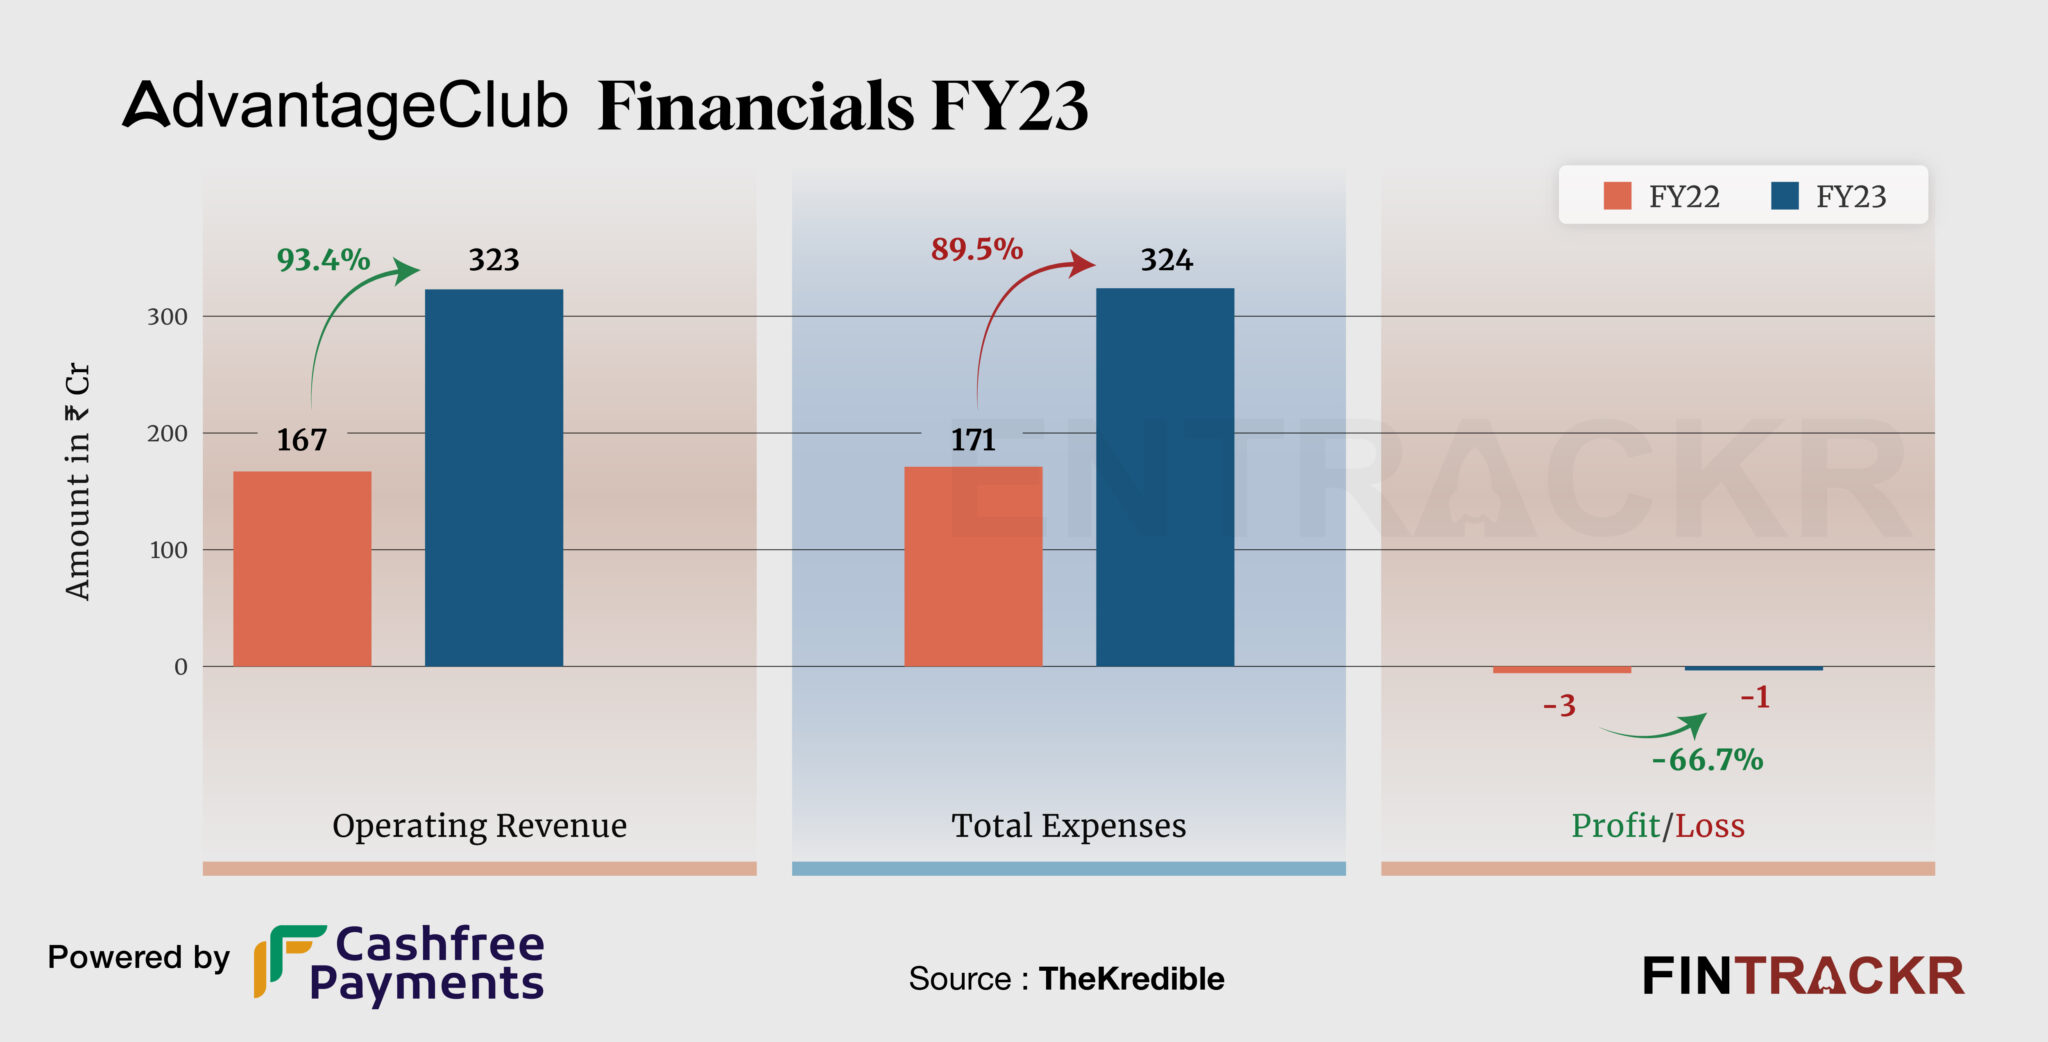 BlissClub reports double digit increase in both revenue and losses in FY23